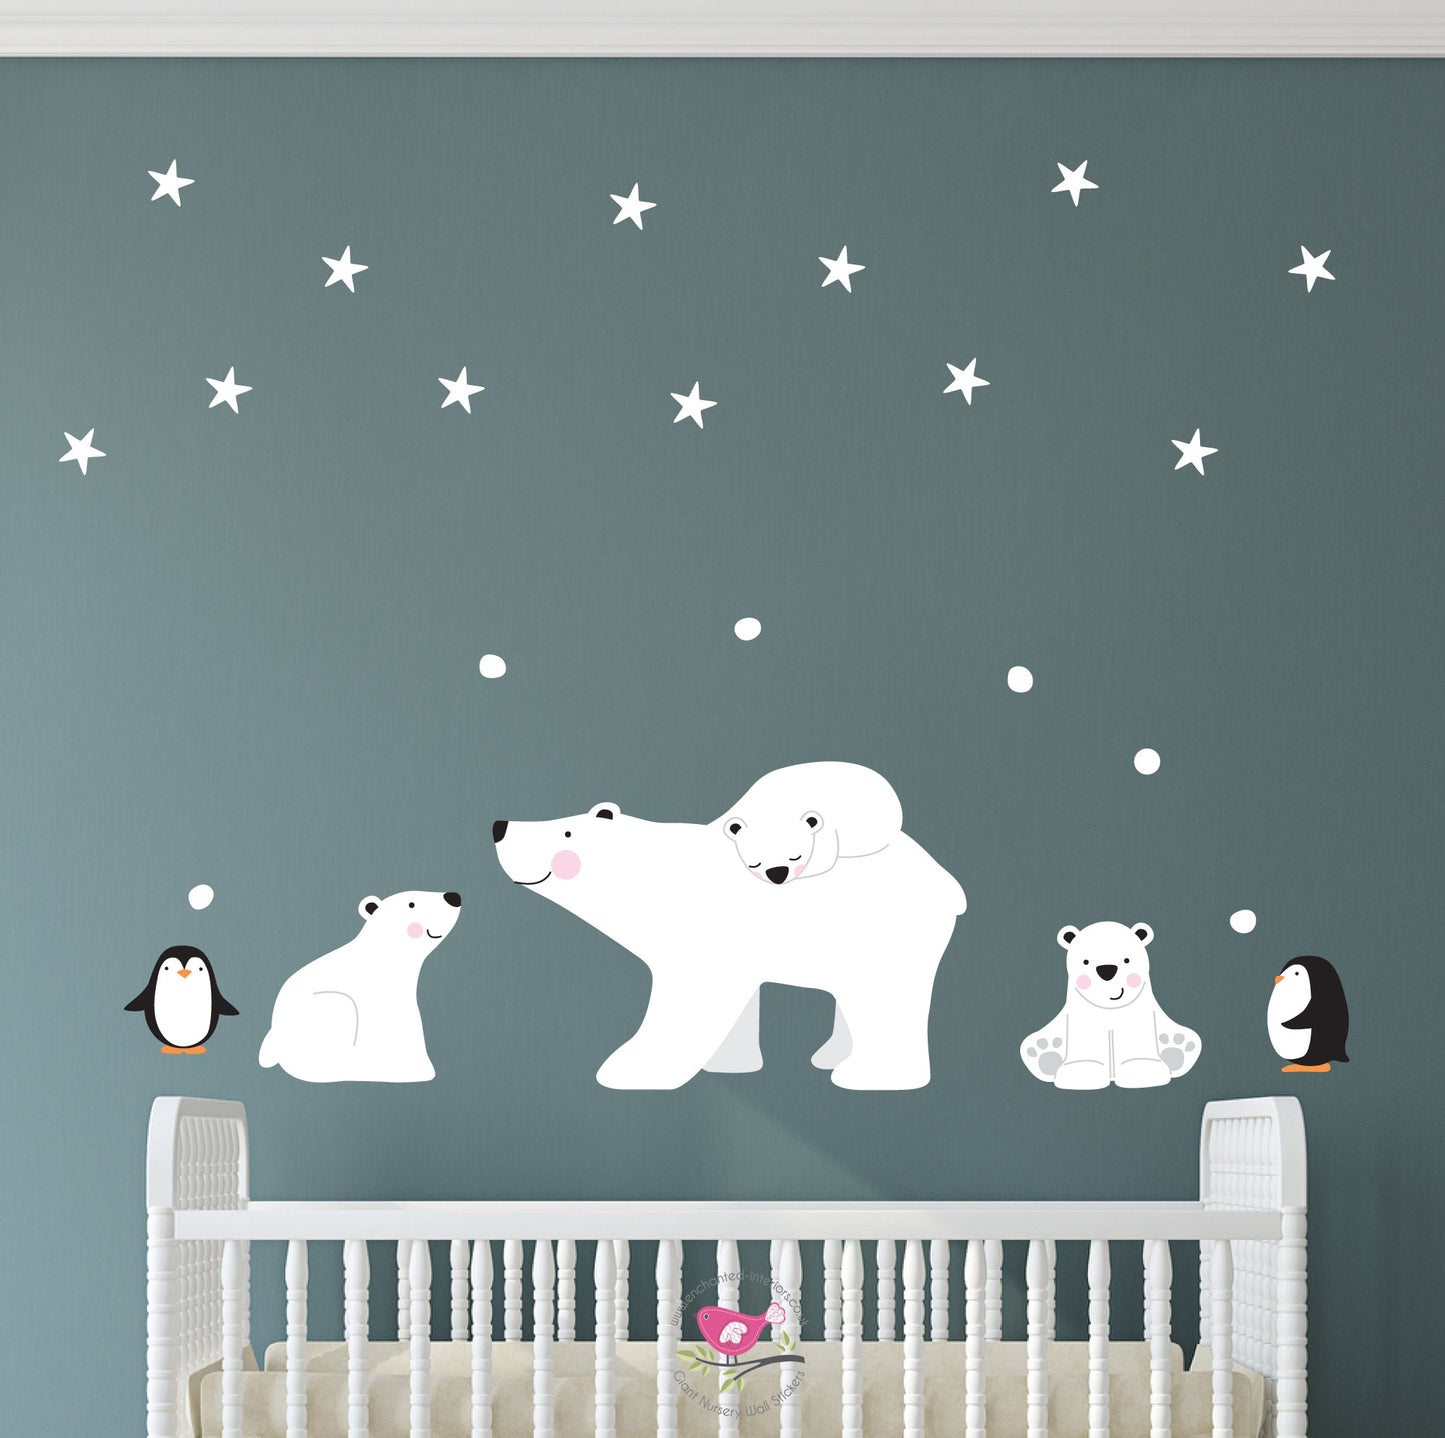 Polar Bears and Penguins Wall Stickers